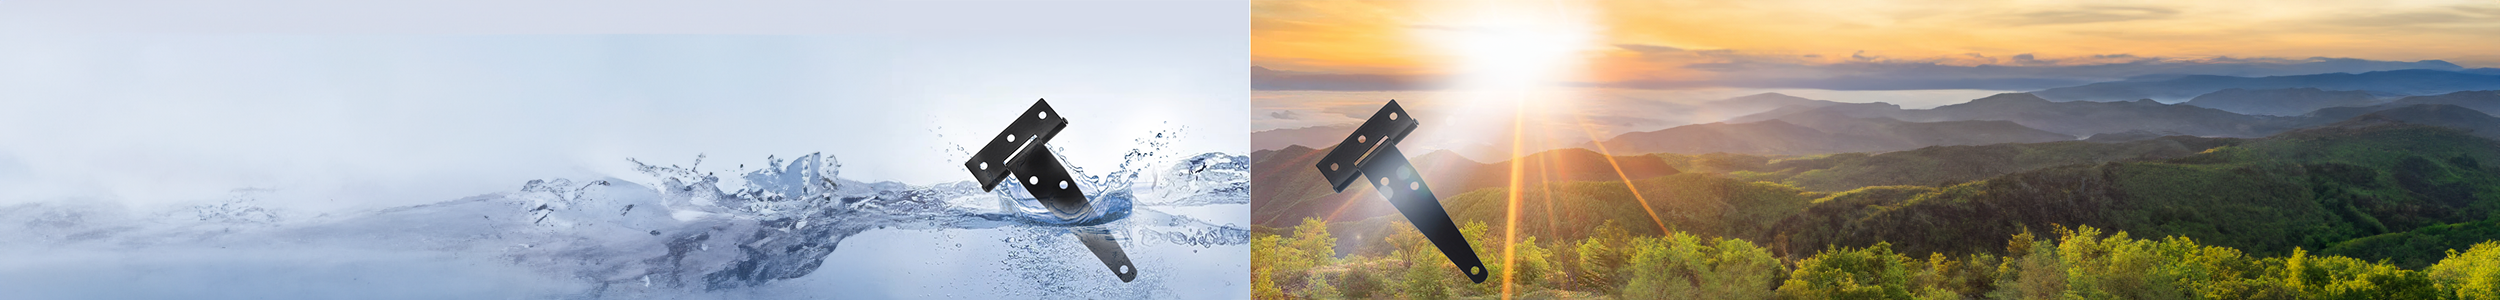 FAQS T-hinge for all weathers